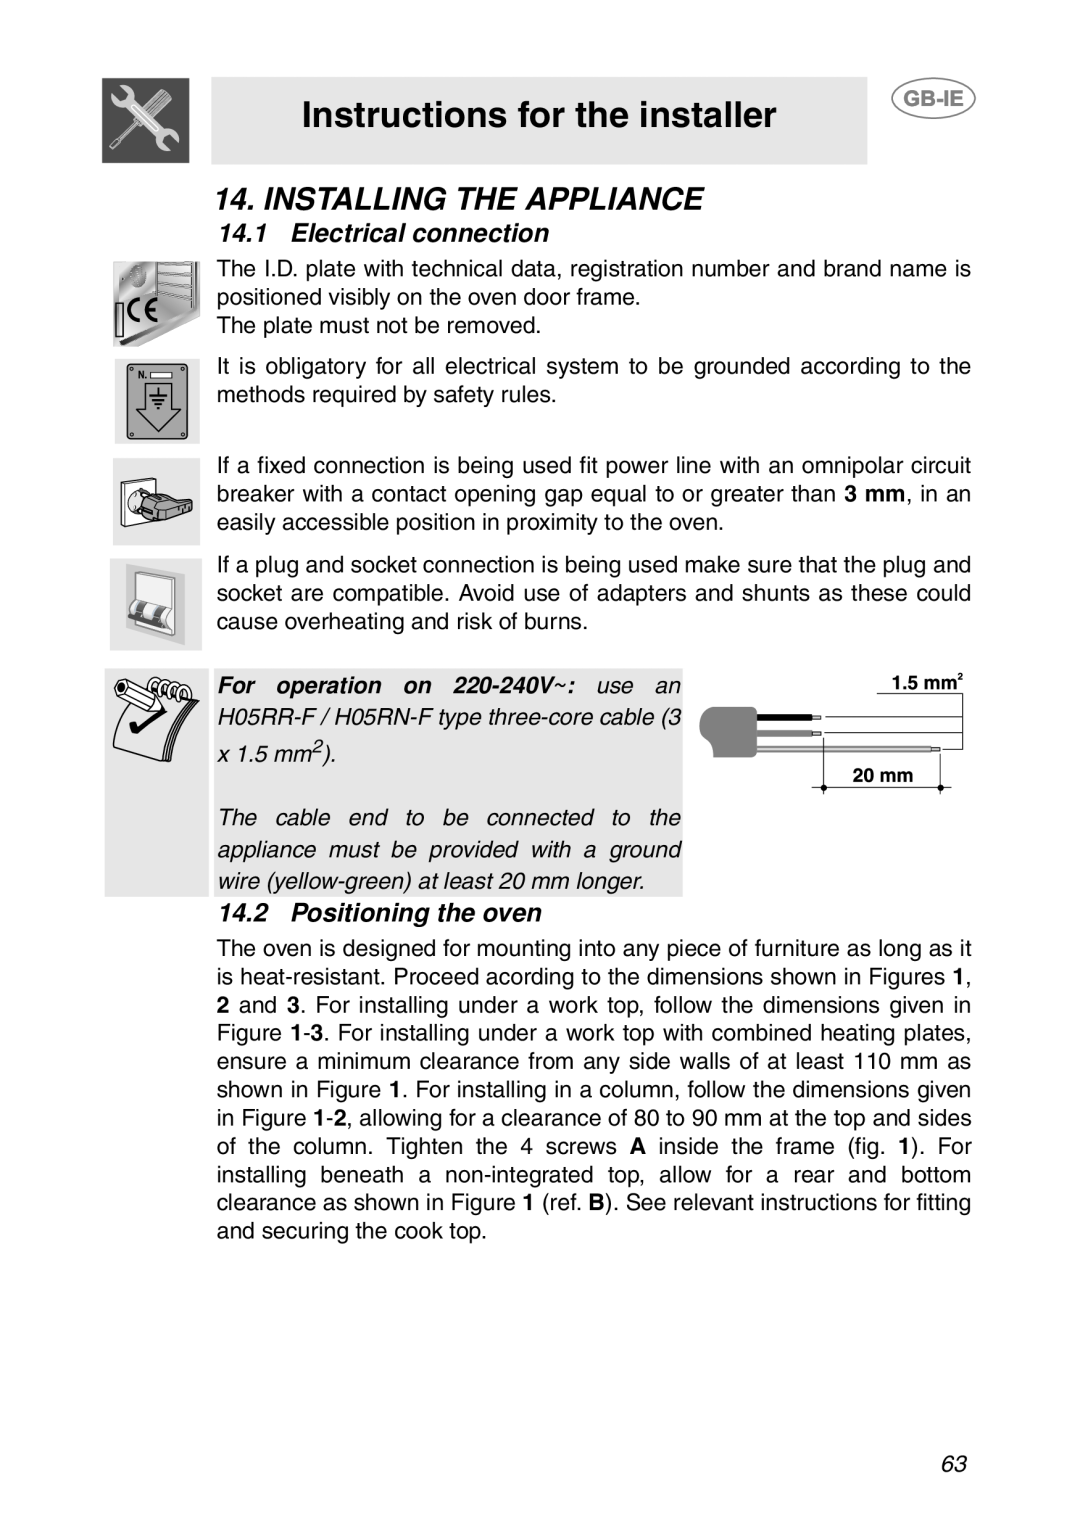 Smeg S200EB/1 Instructions for the installer, Installing The Appliance, 14.1Electrical connection, Positioning the oven 